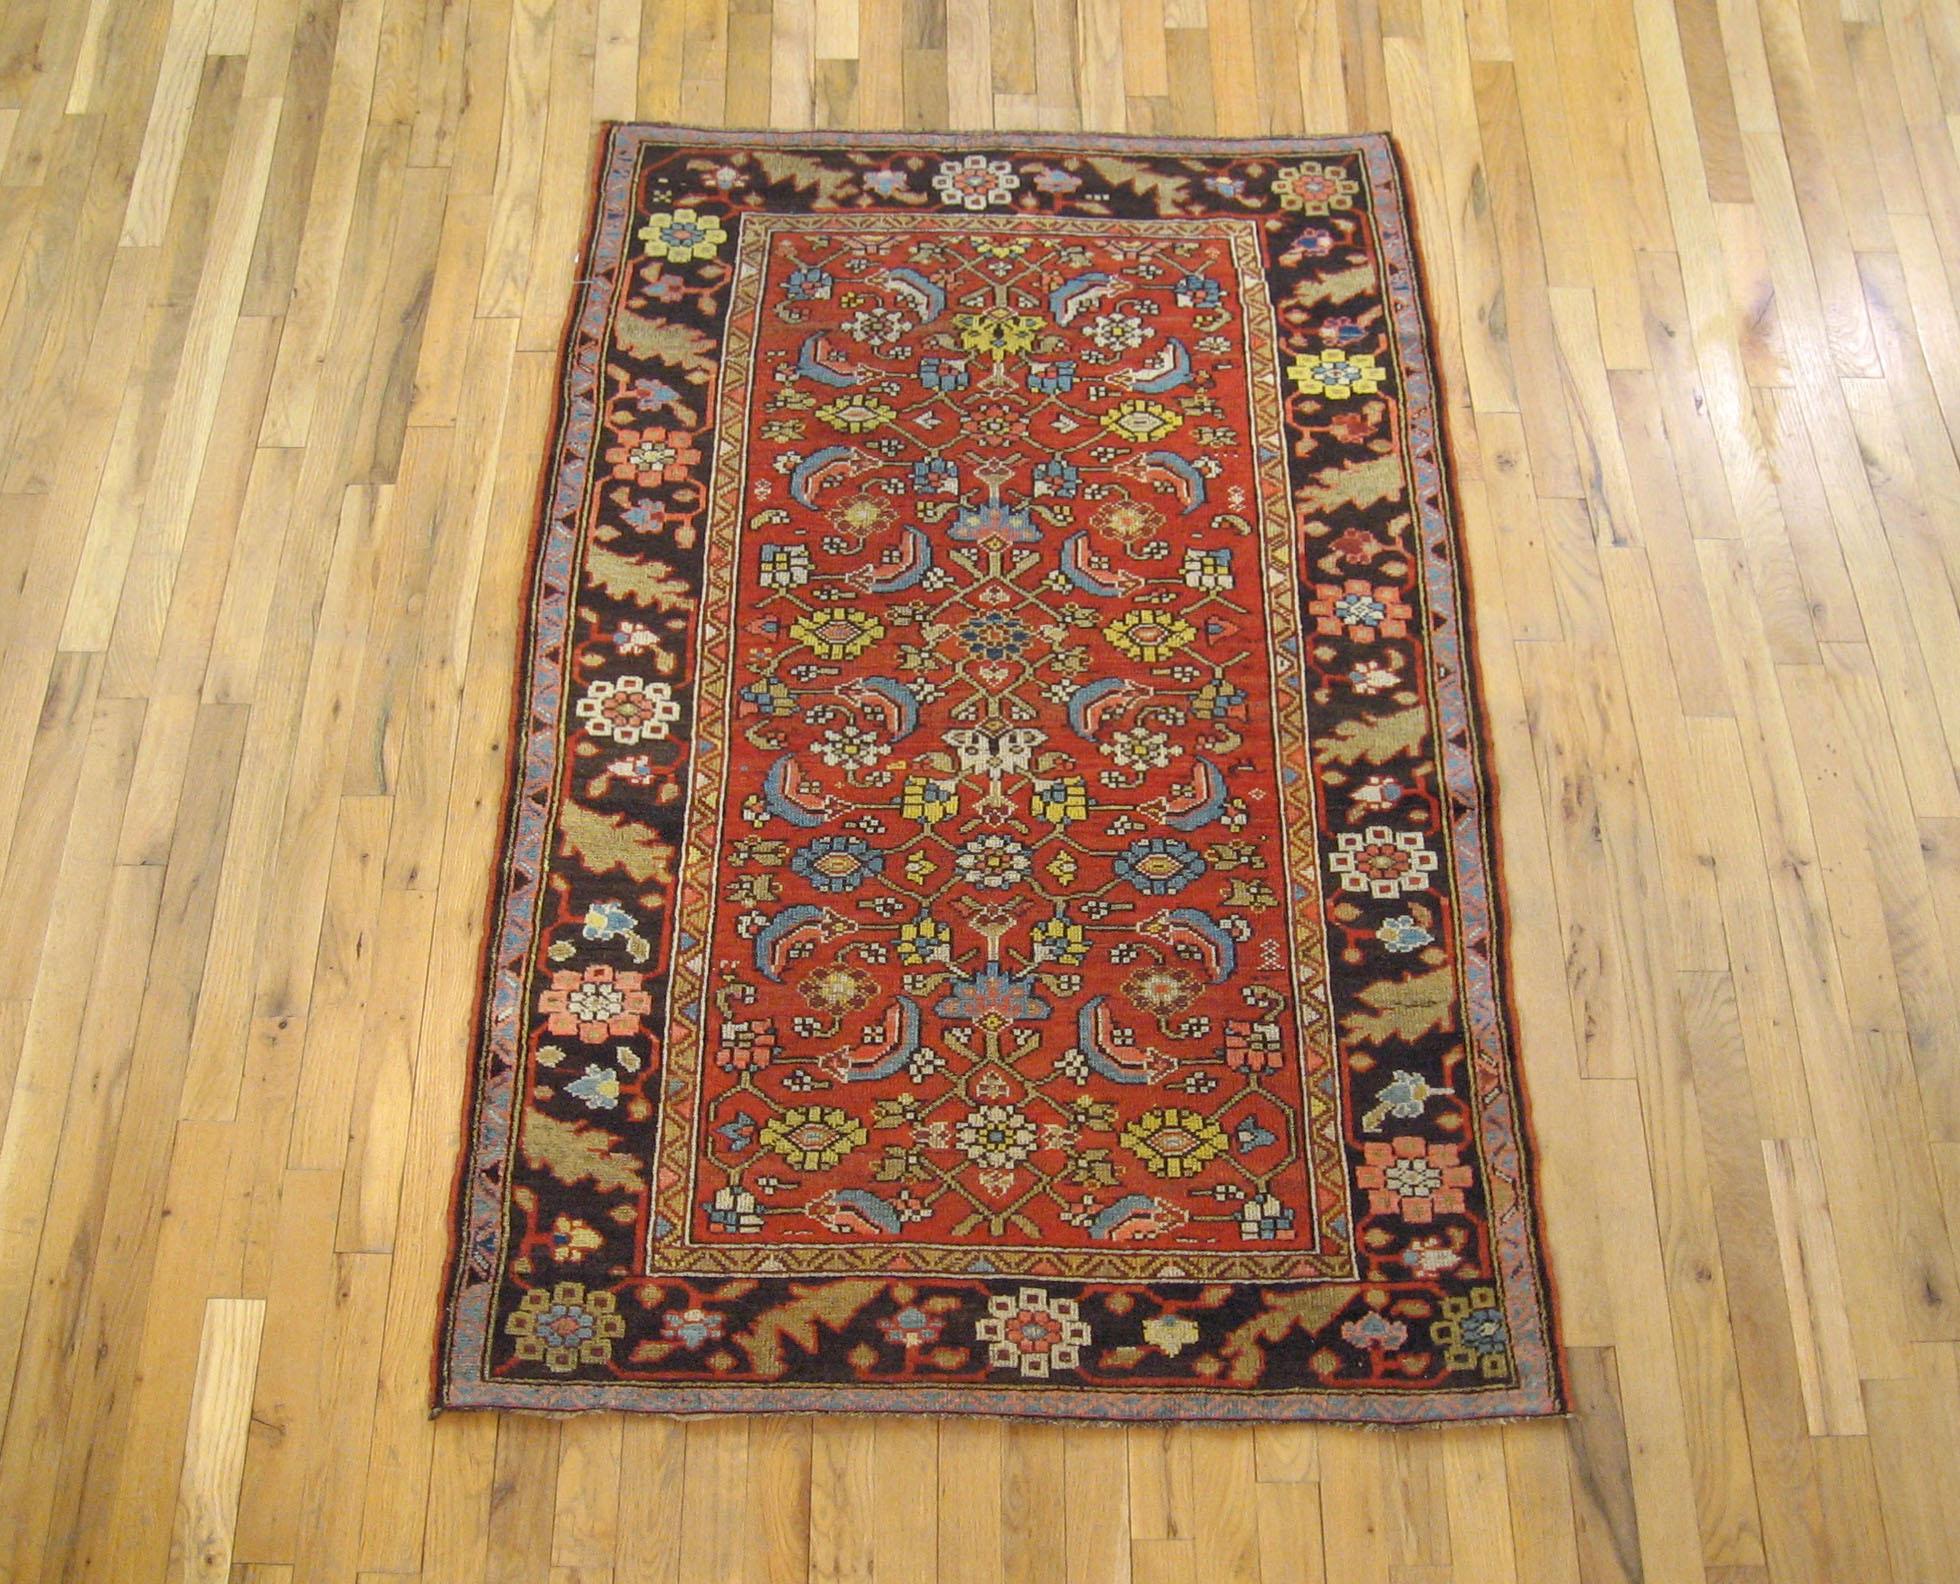 Antique Persian Bidjar Rug, Small size, circa 1900.

A one-of-a-kind antique Persian Bidjar Oriental Carpet, hand-knotted with soft wool pile. This beautiful rug features a repeating Herati design on the soft red primary field, with a brown outer